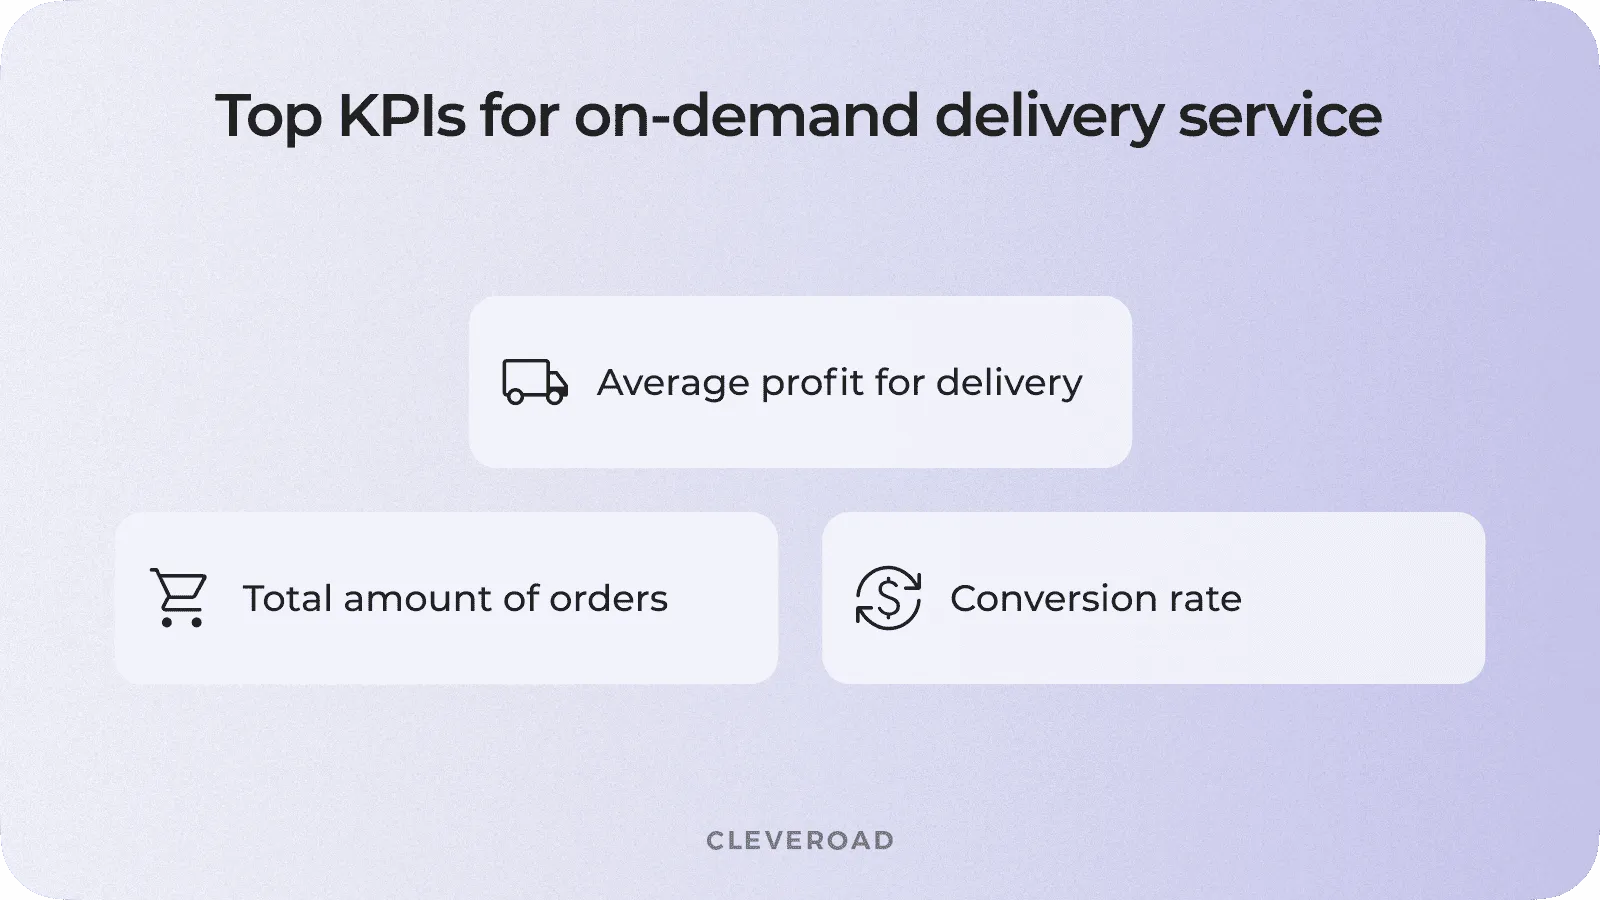 Create an on-demand delivery service: Top KPIs